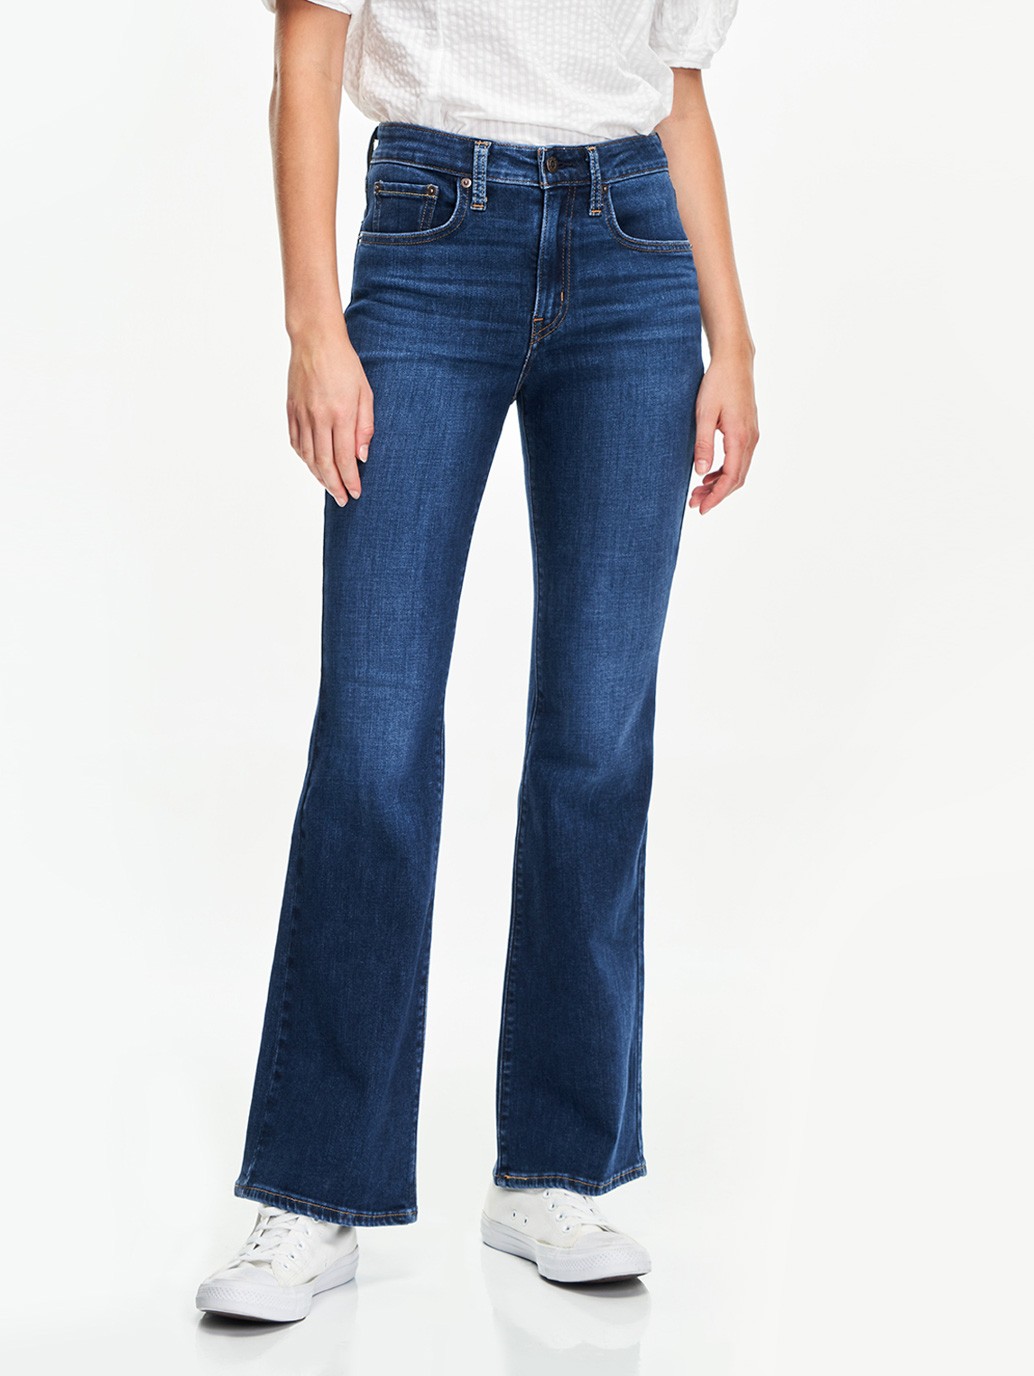 Levi's® 726 High Rise Destructed Knee Flare Jeans, 59% OFF